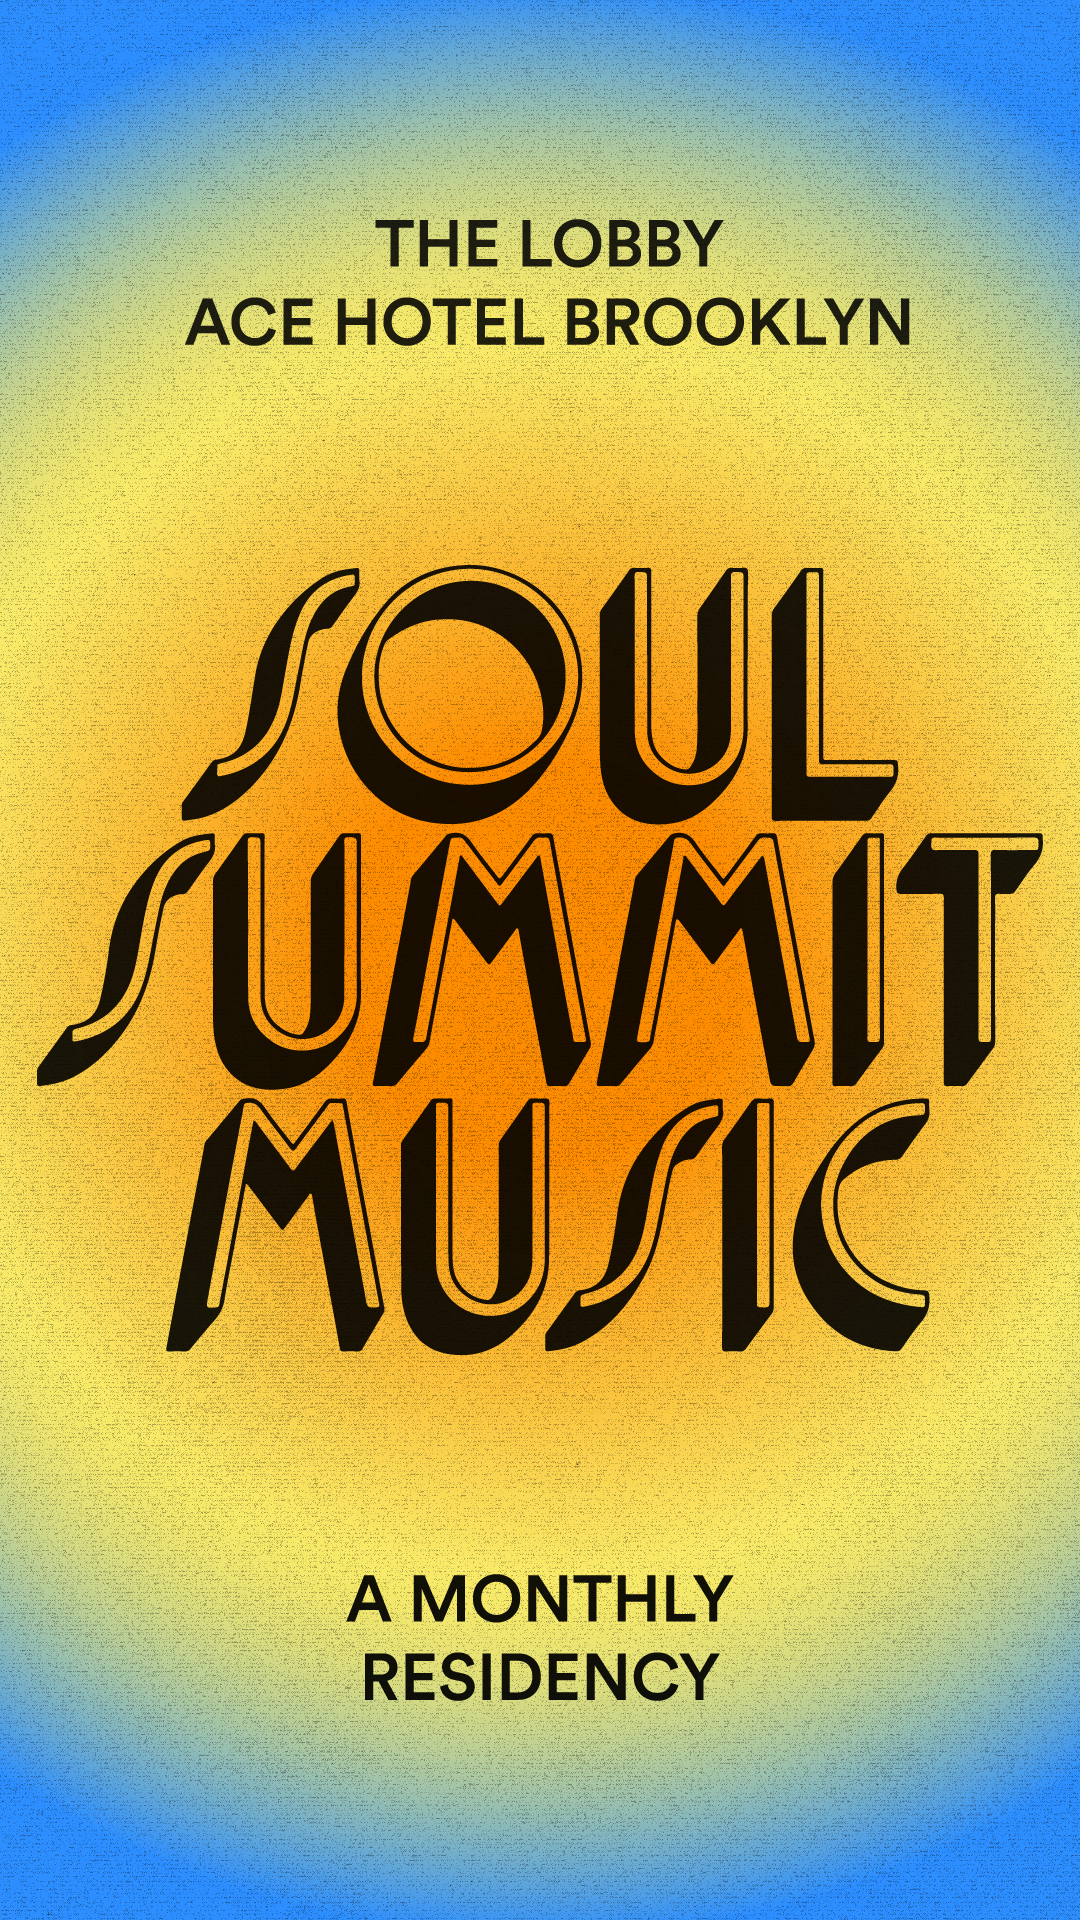 Soul Summit Music event flyer